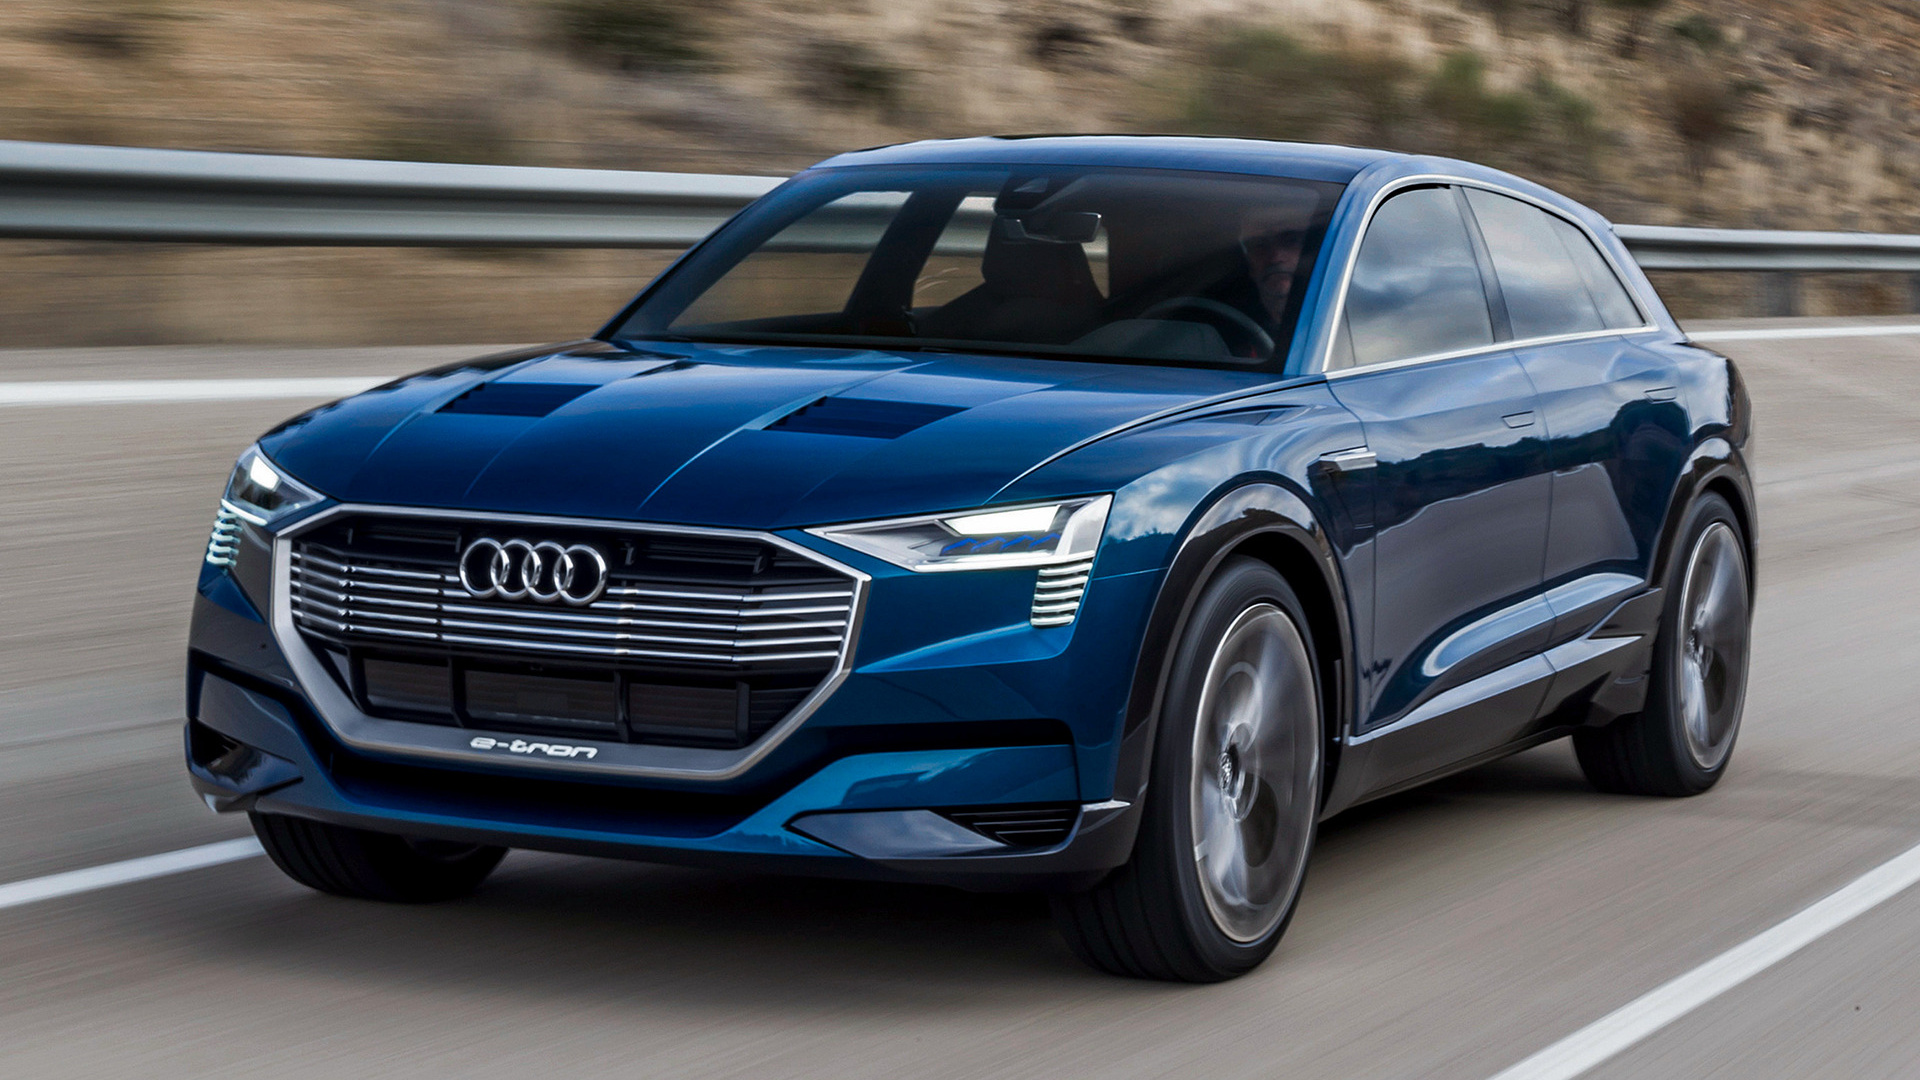 Audi etron quattro concept 2015 Wallpapers and HD Images